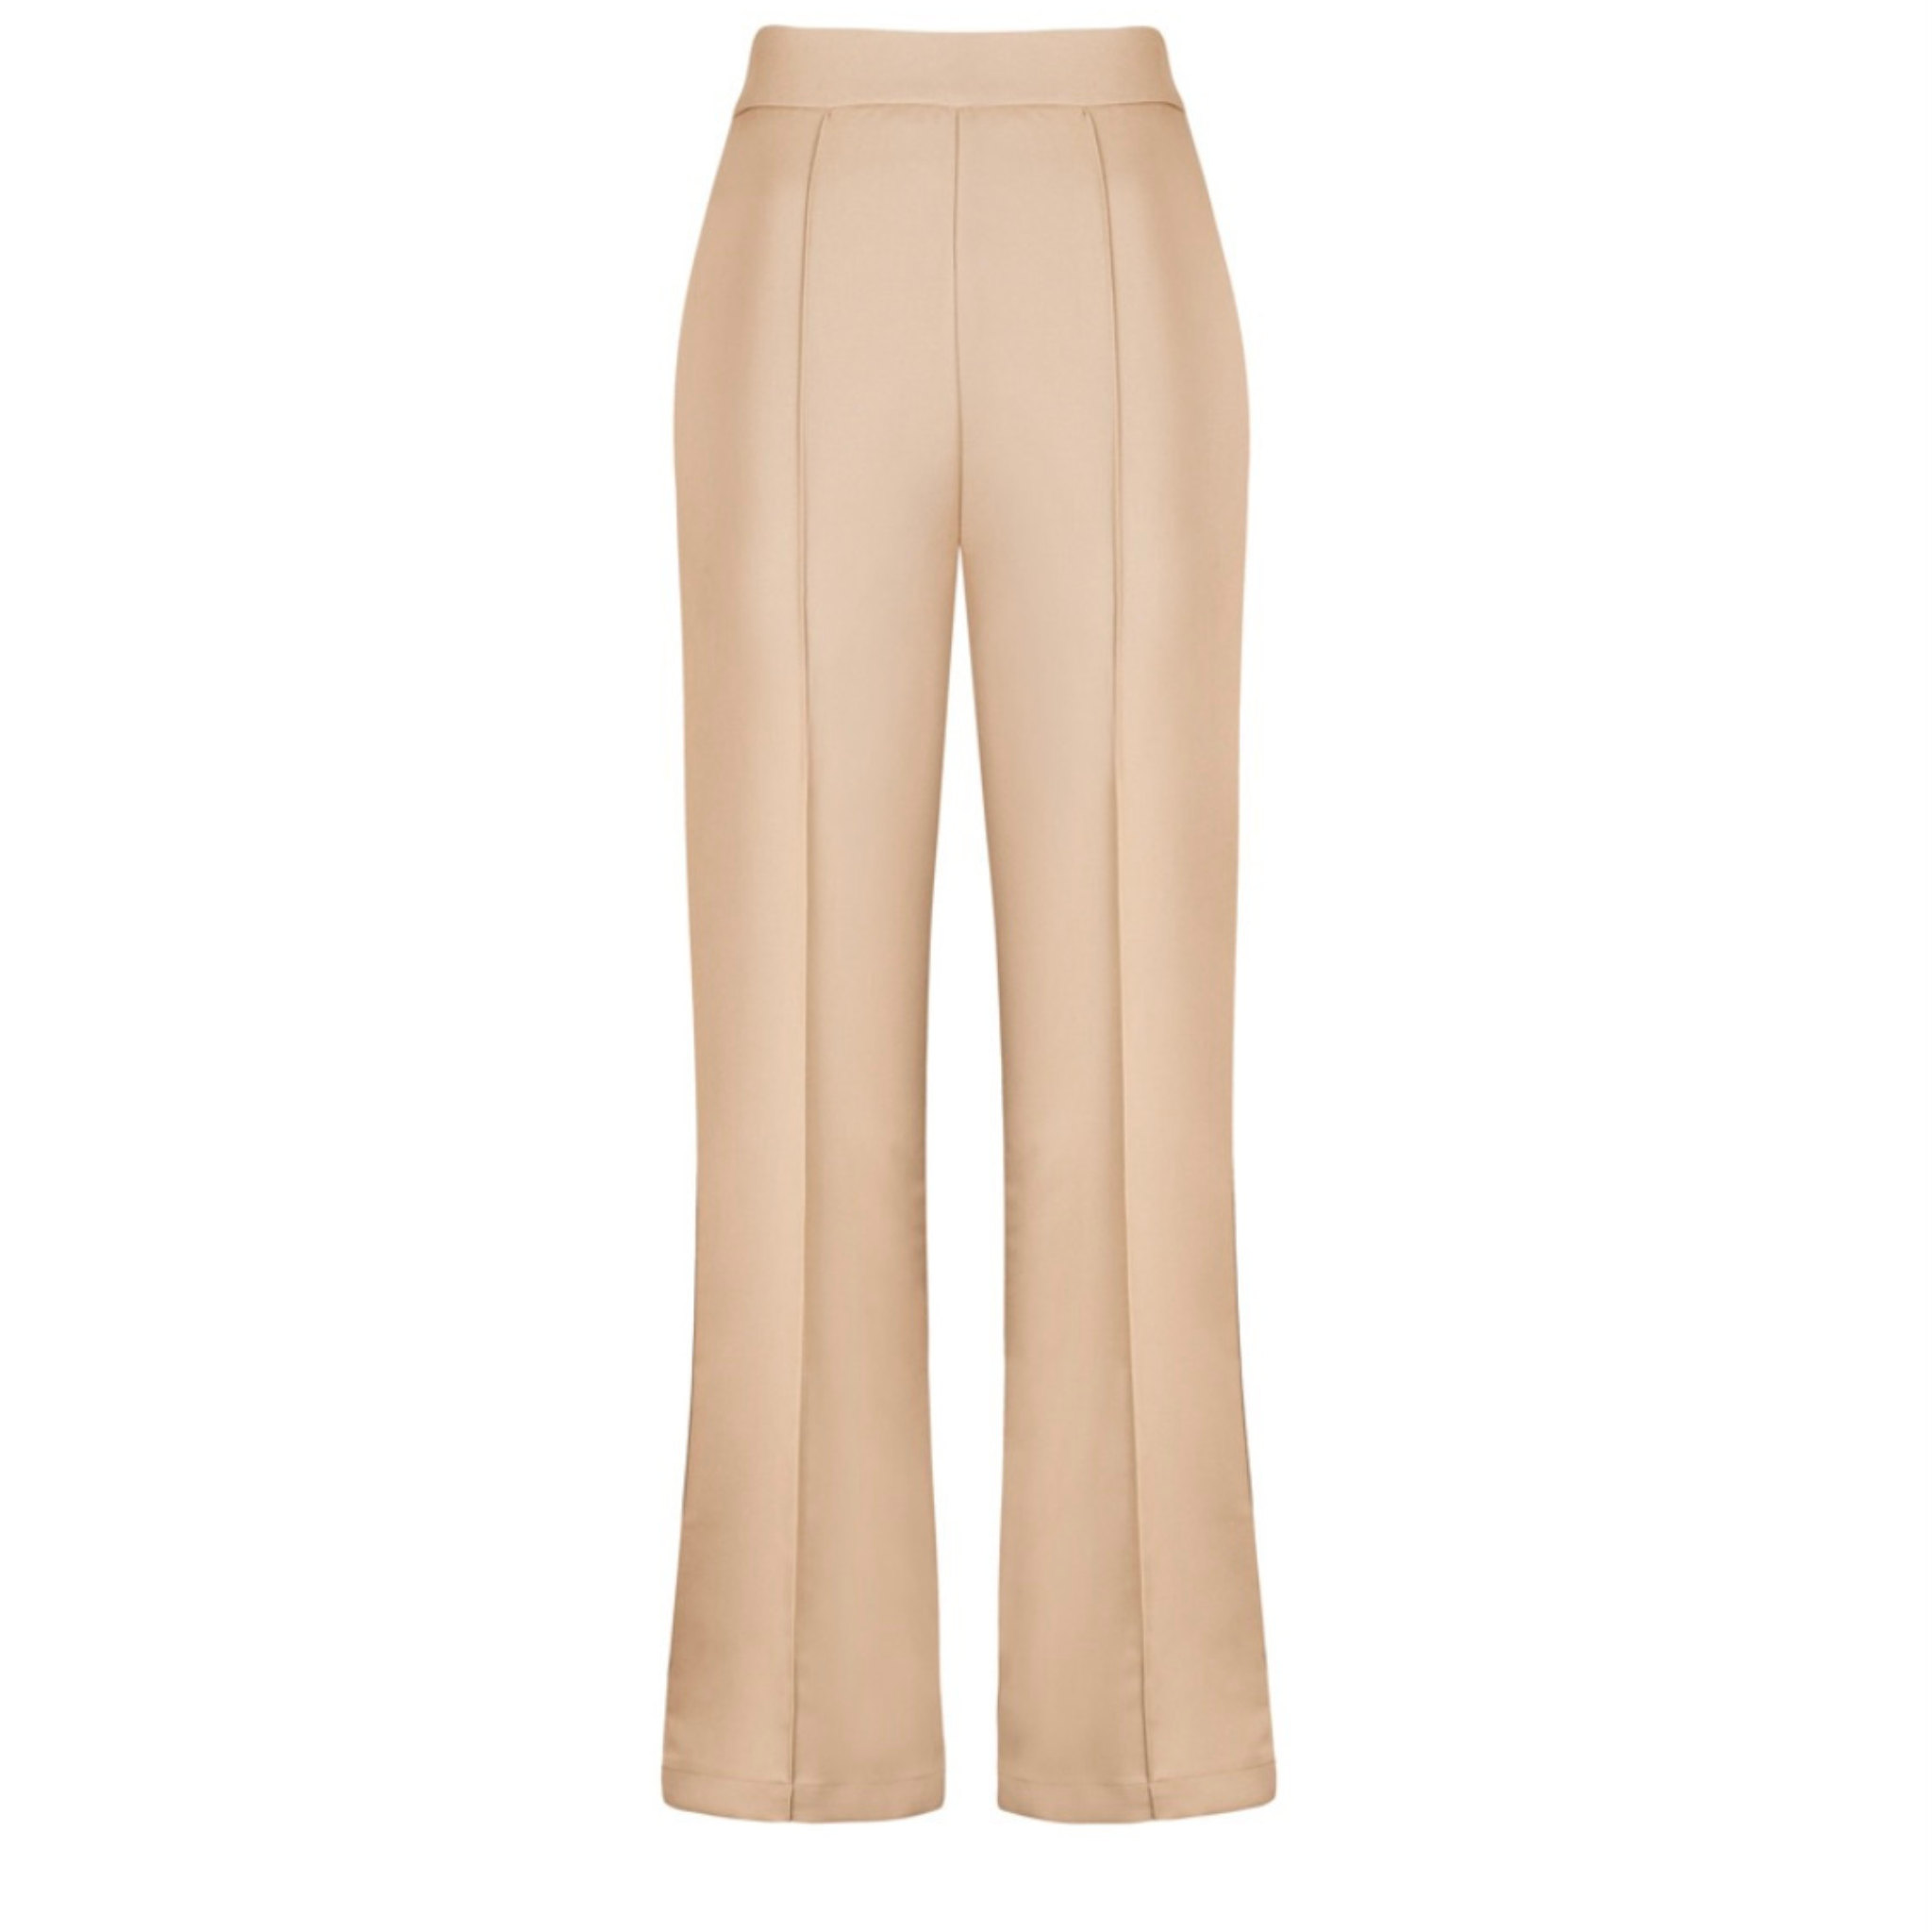 Beige high-waisted, wide-leg tailored trousers for women. Timeless and sophisticated, these trousers feature a flowing silhouette with a flattering fit. Perfect for adding a touch of elegance to any outfit